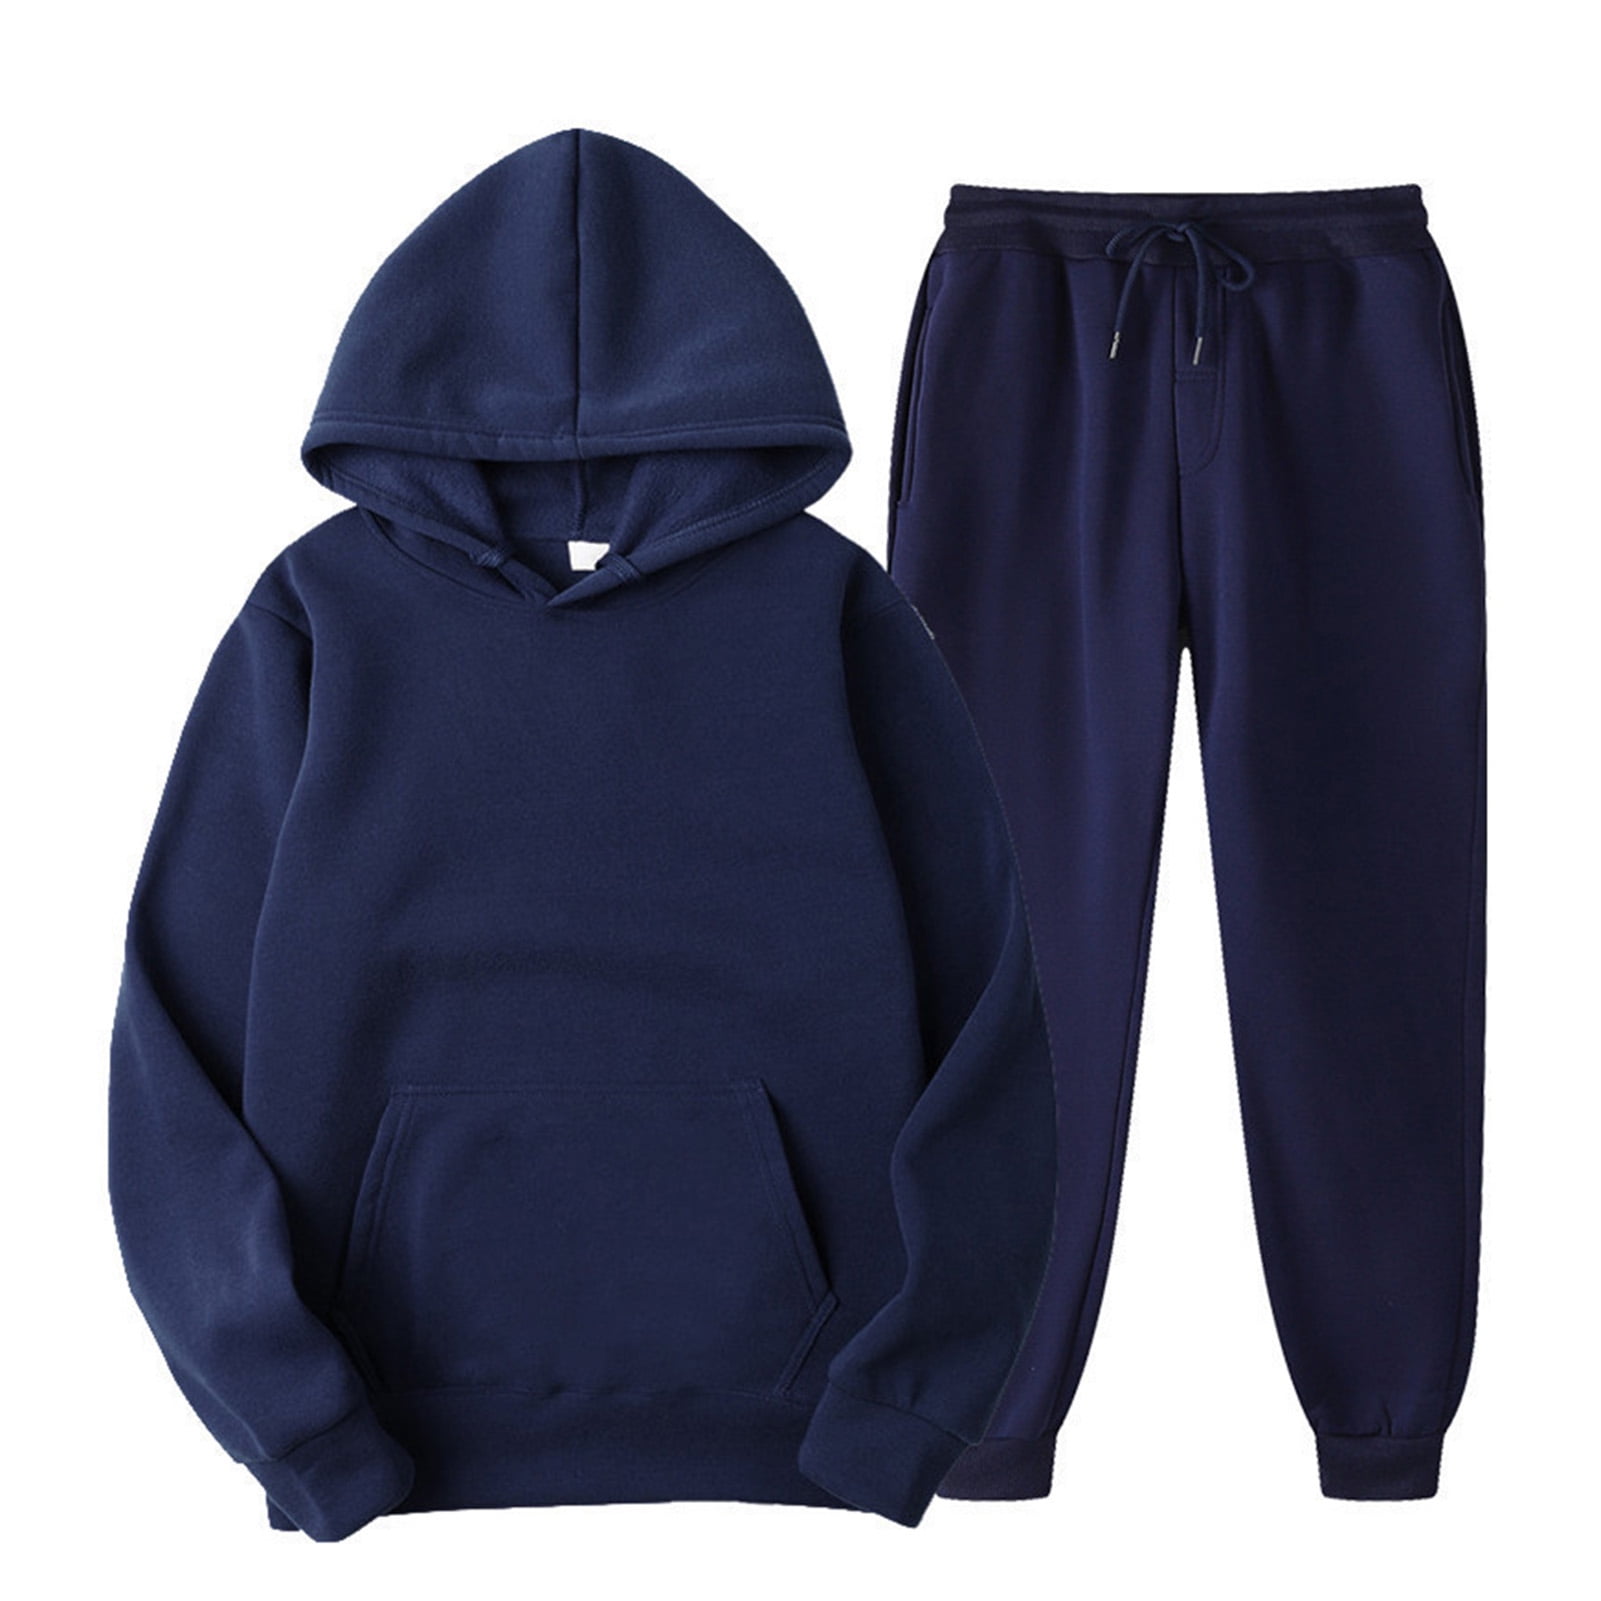 Winter Winter Tracksuit For Men Set With Hoodie And Pants Fur Lined Gym  Clothing For Warmth And Comfort From Blueberry12, $33.67 | DHgate.Com